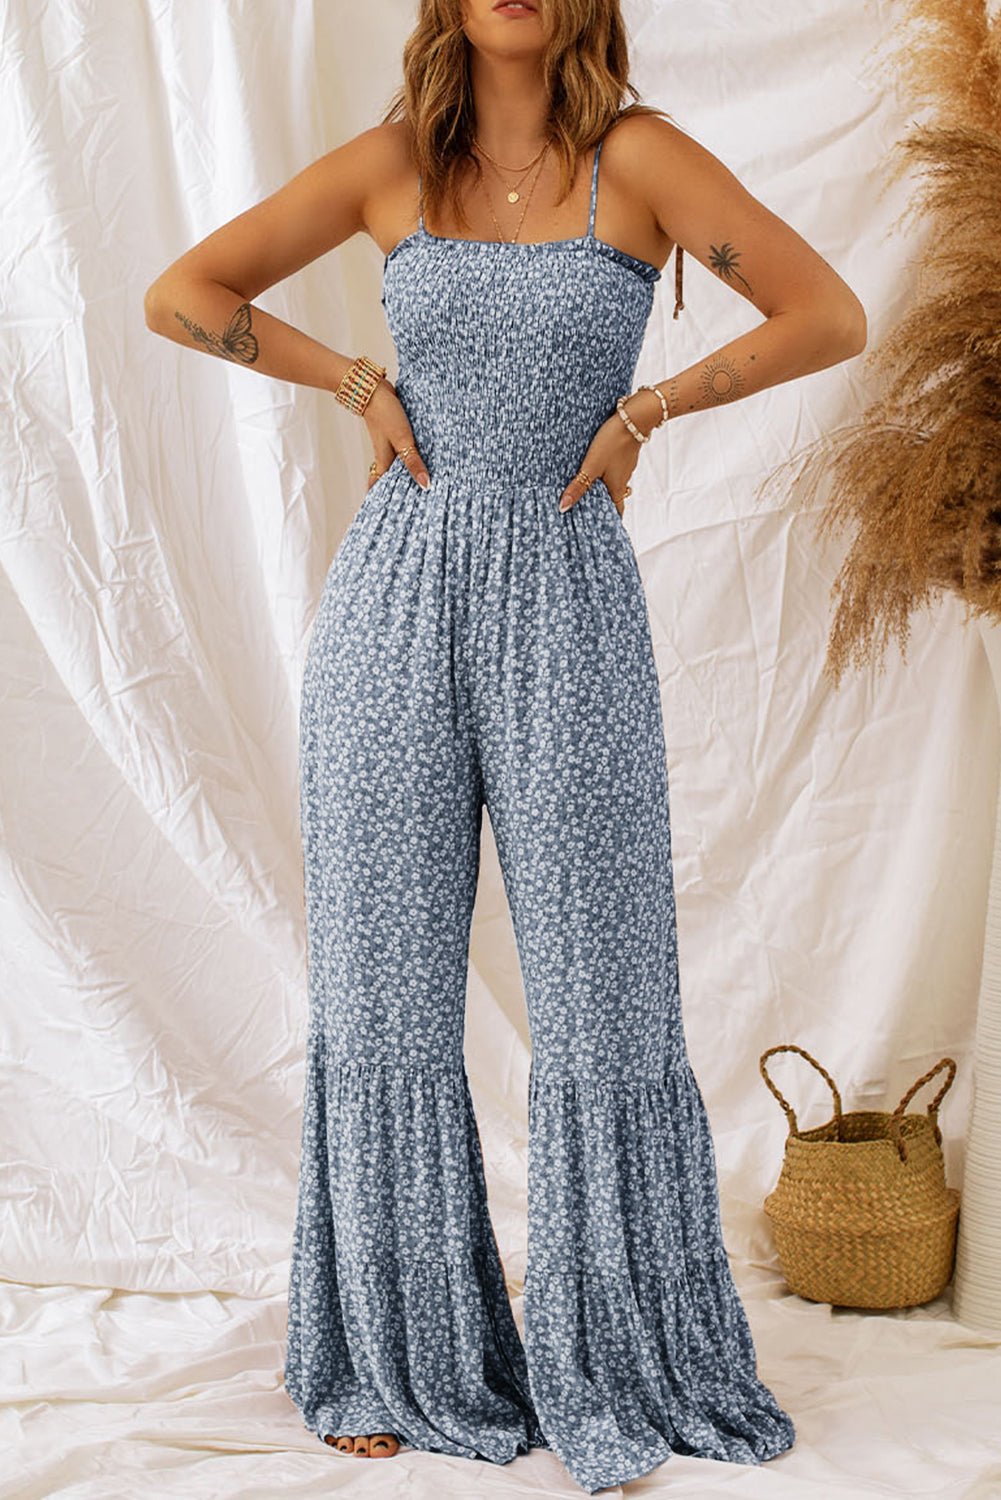 Smocked Printed Wide Strap Jumpsuit - Fashion Girl Online Store